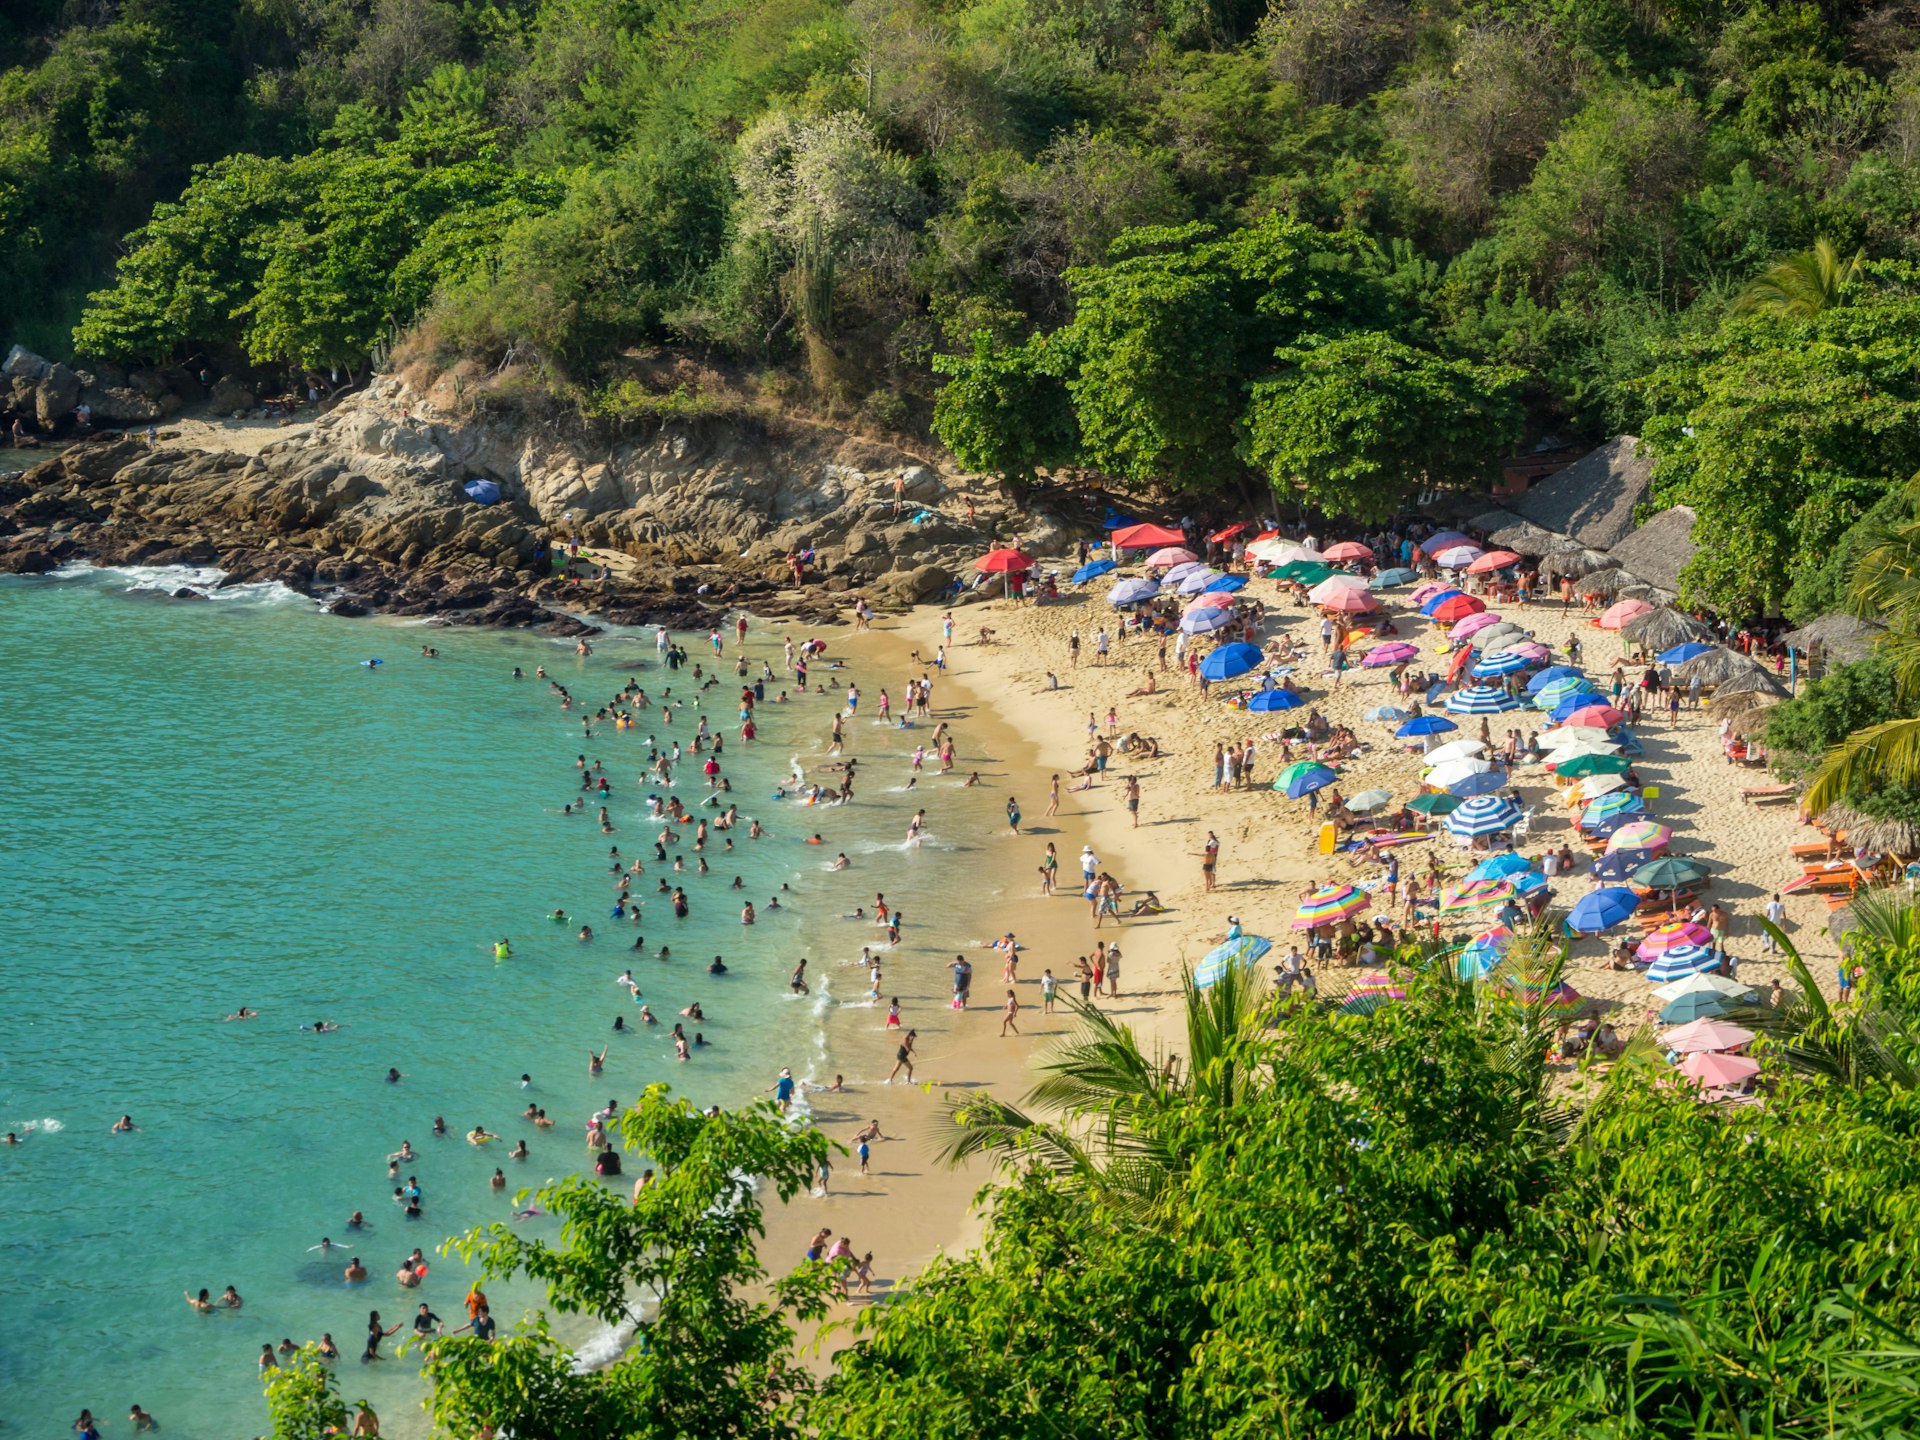 Aerial view of a crowded beach surrounded by jungle, facing turquoise water